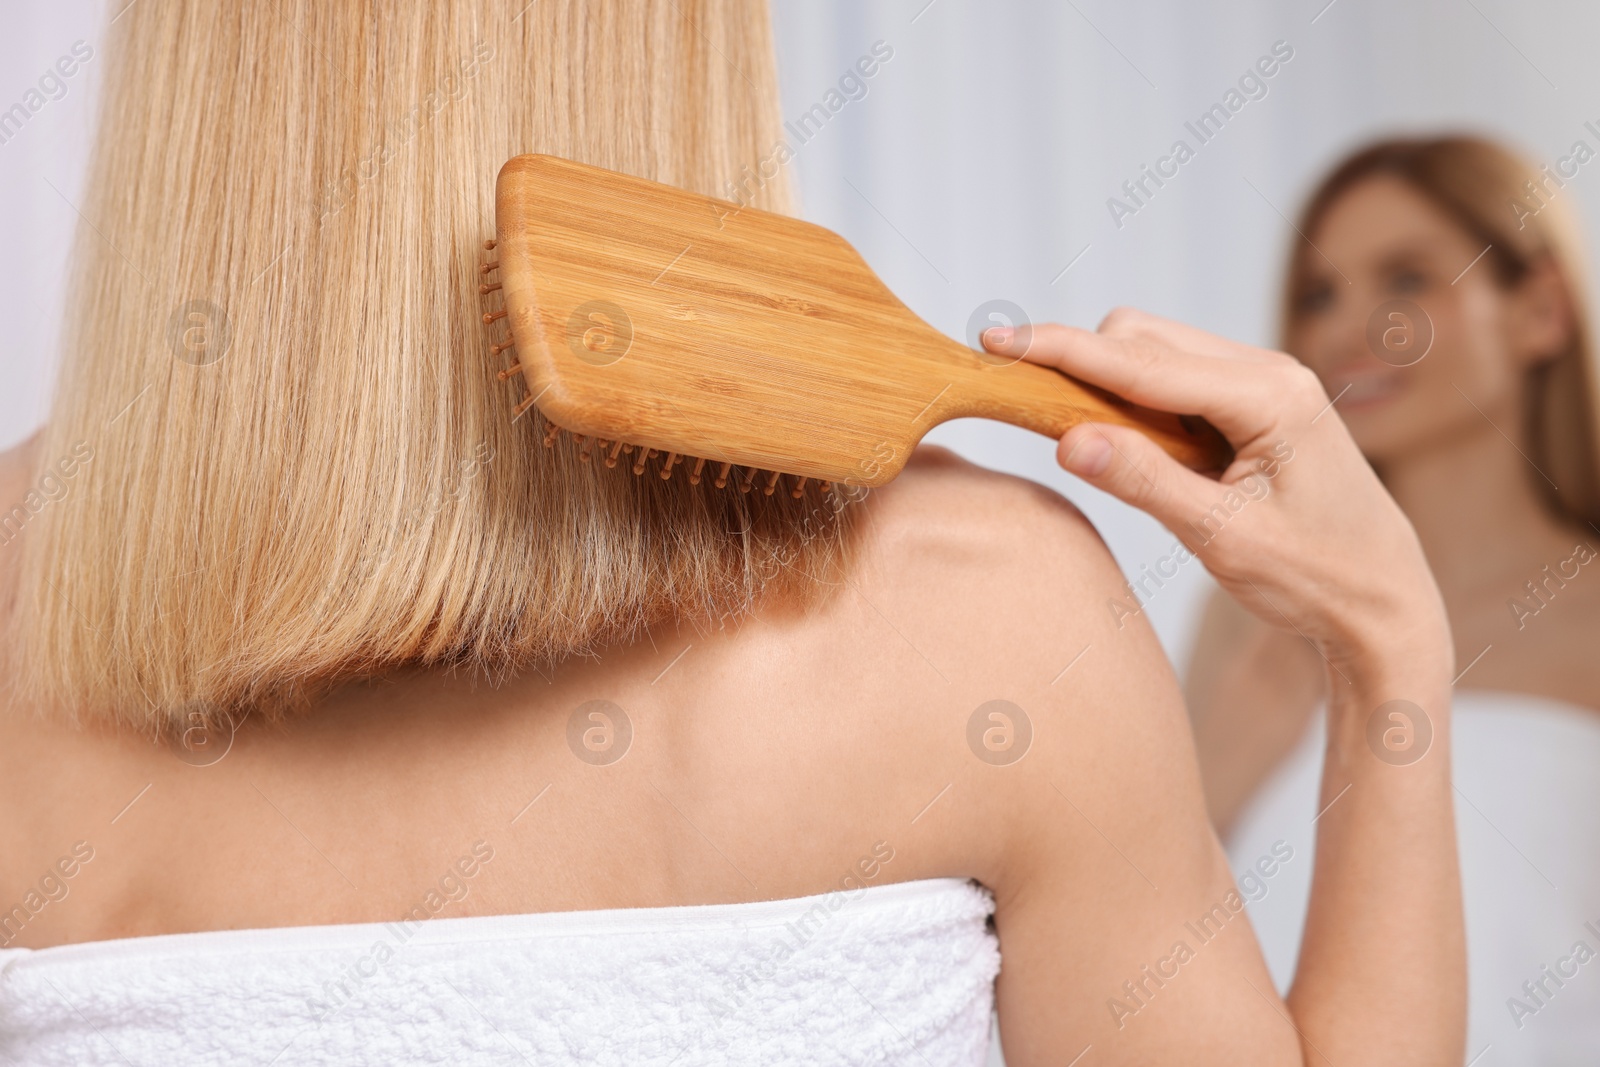 Photo of Woman brushing her hair near mirror in room, back view